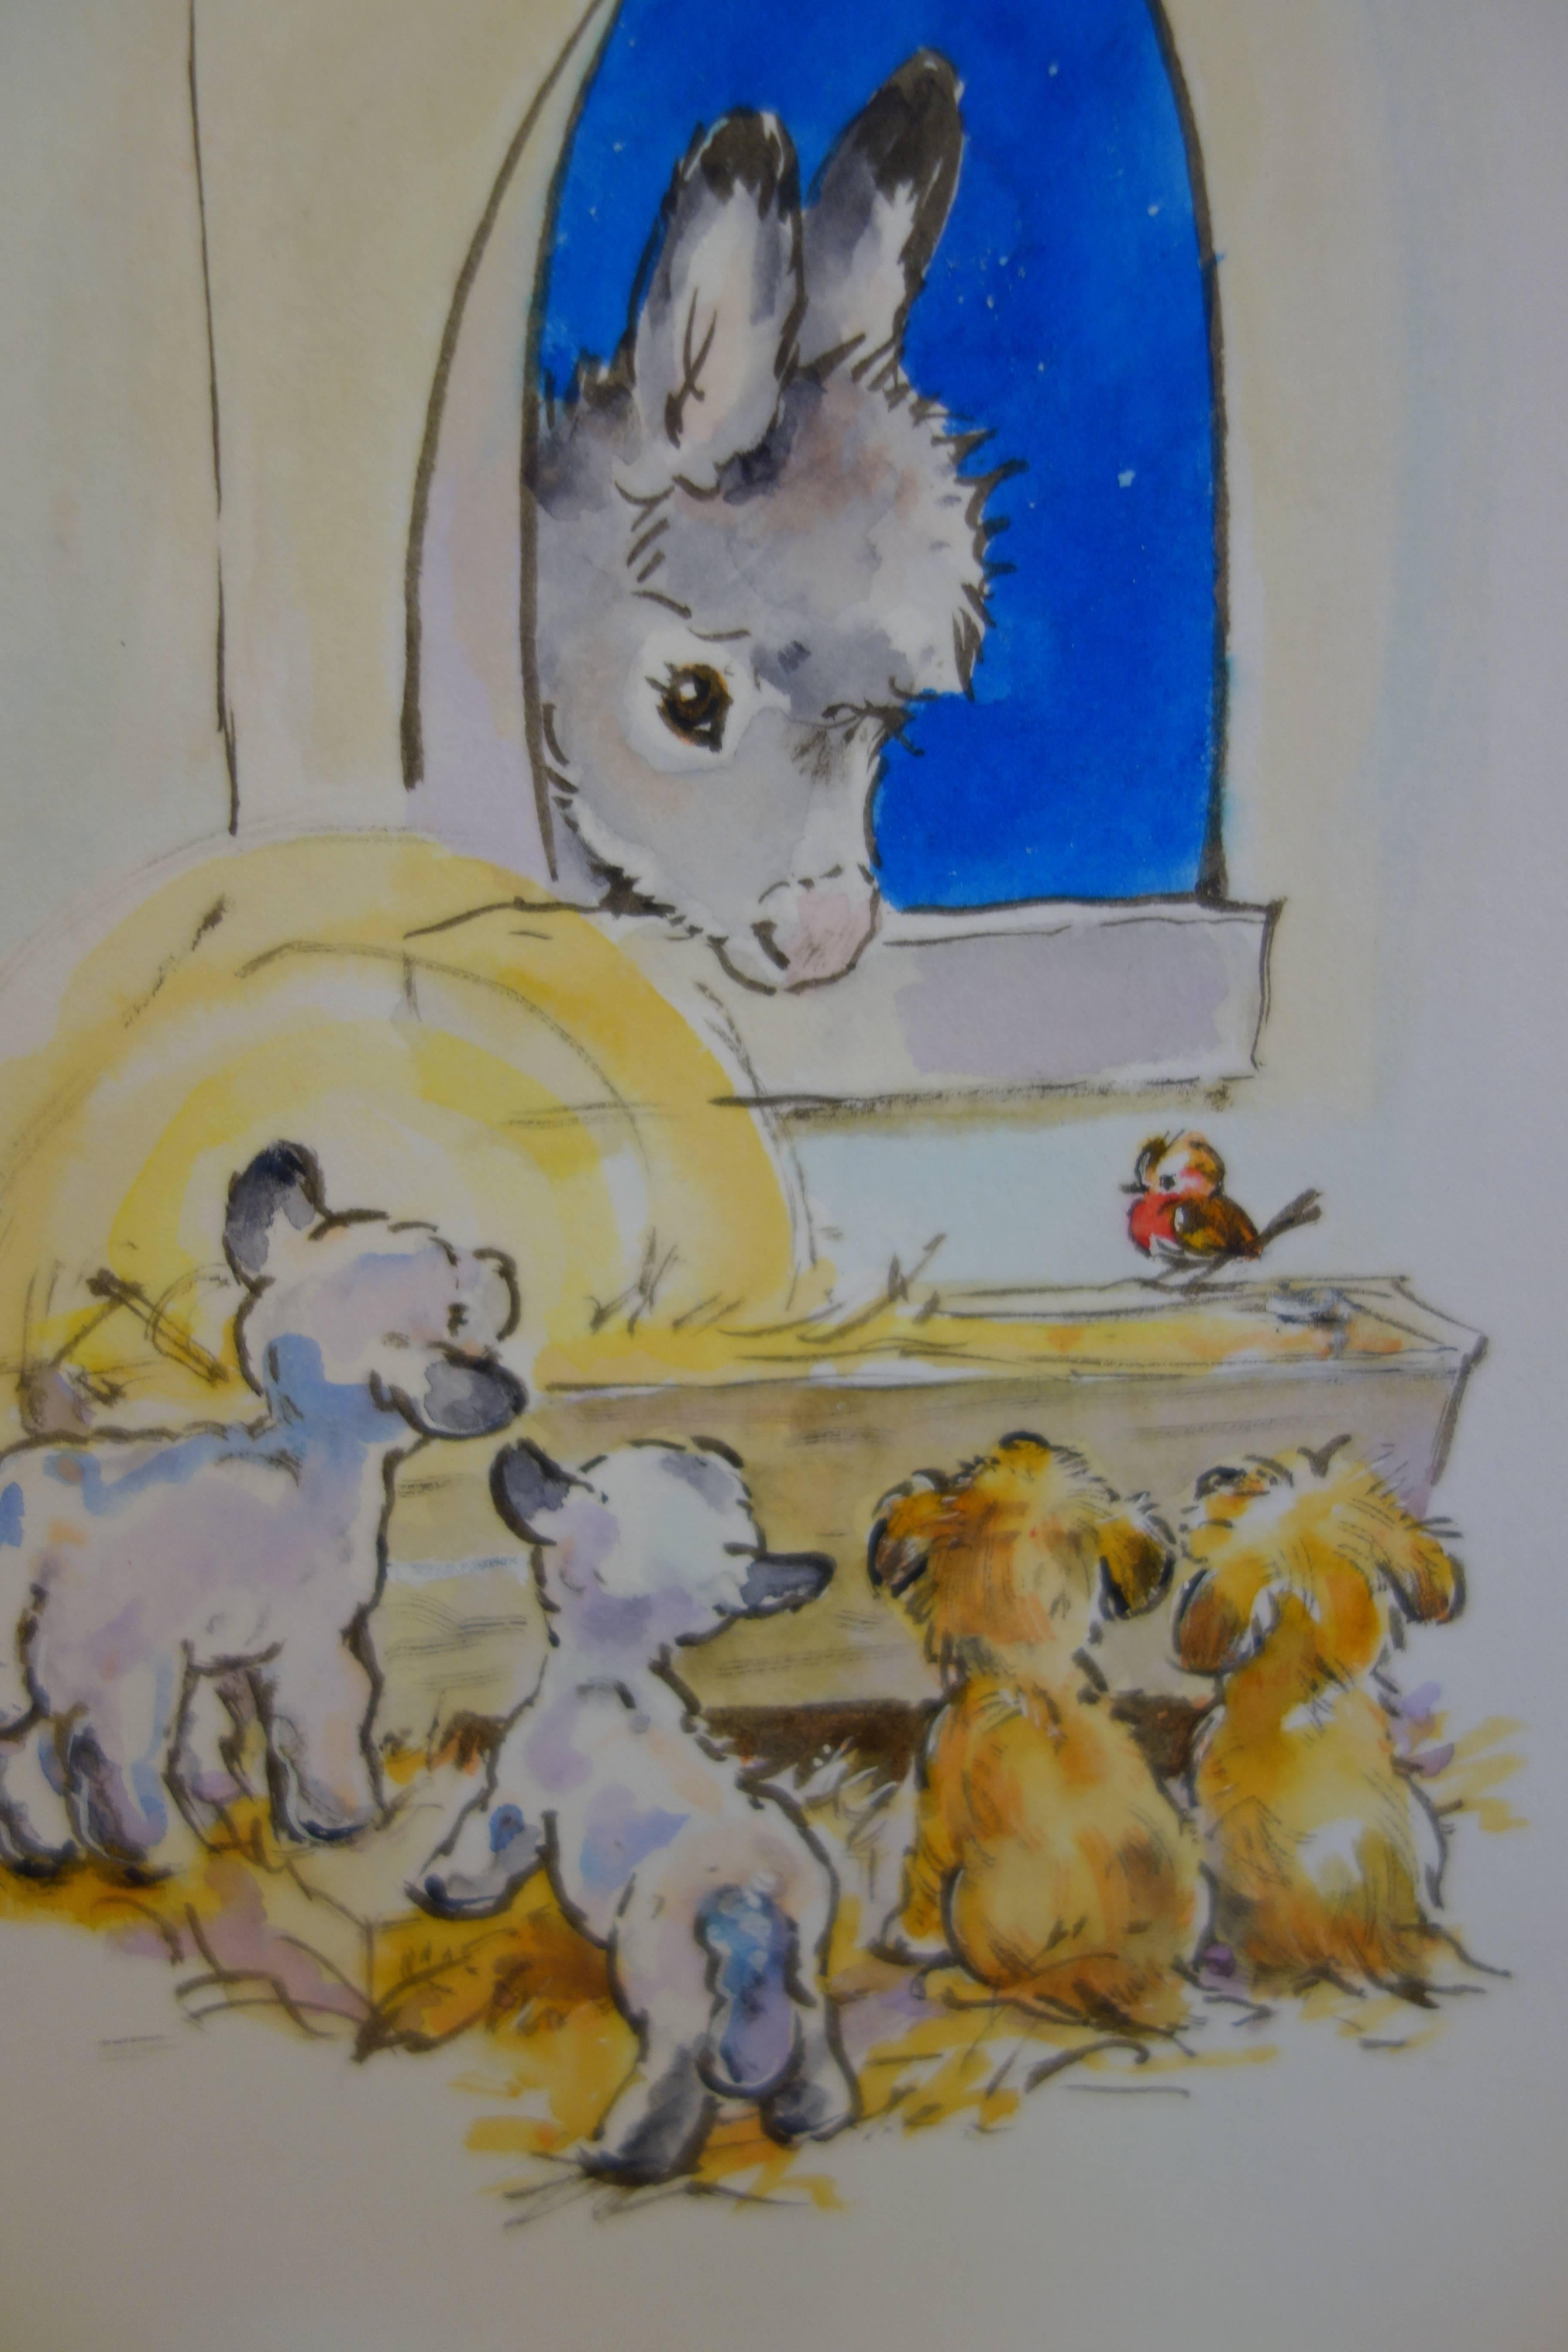 Diana Matthes Figurative Art - Christmas night with Donkeys, a Robin and Lambs in a stable by a crib